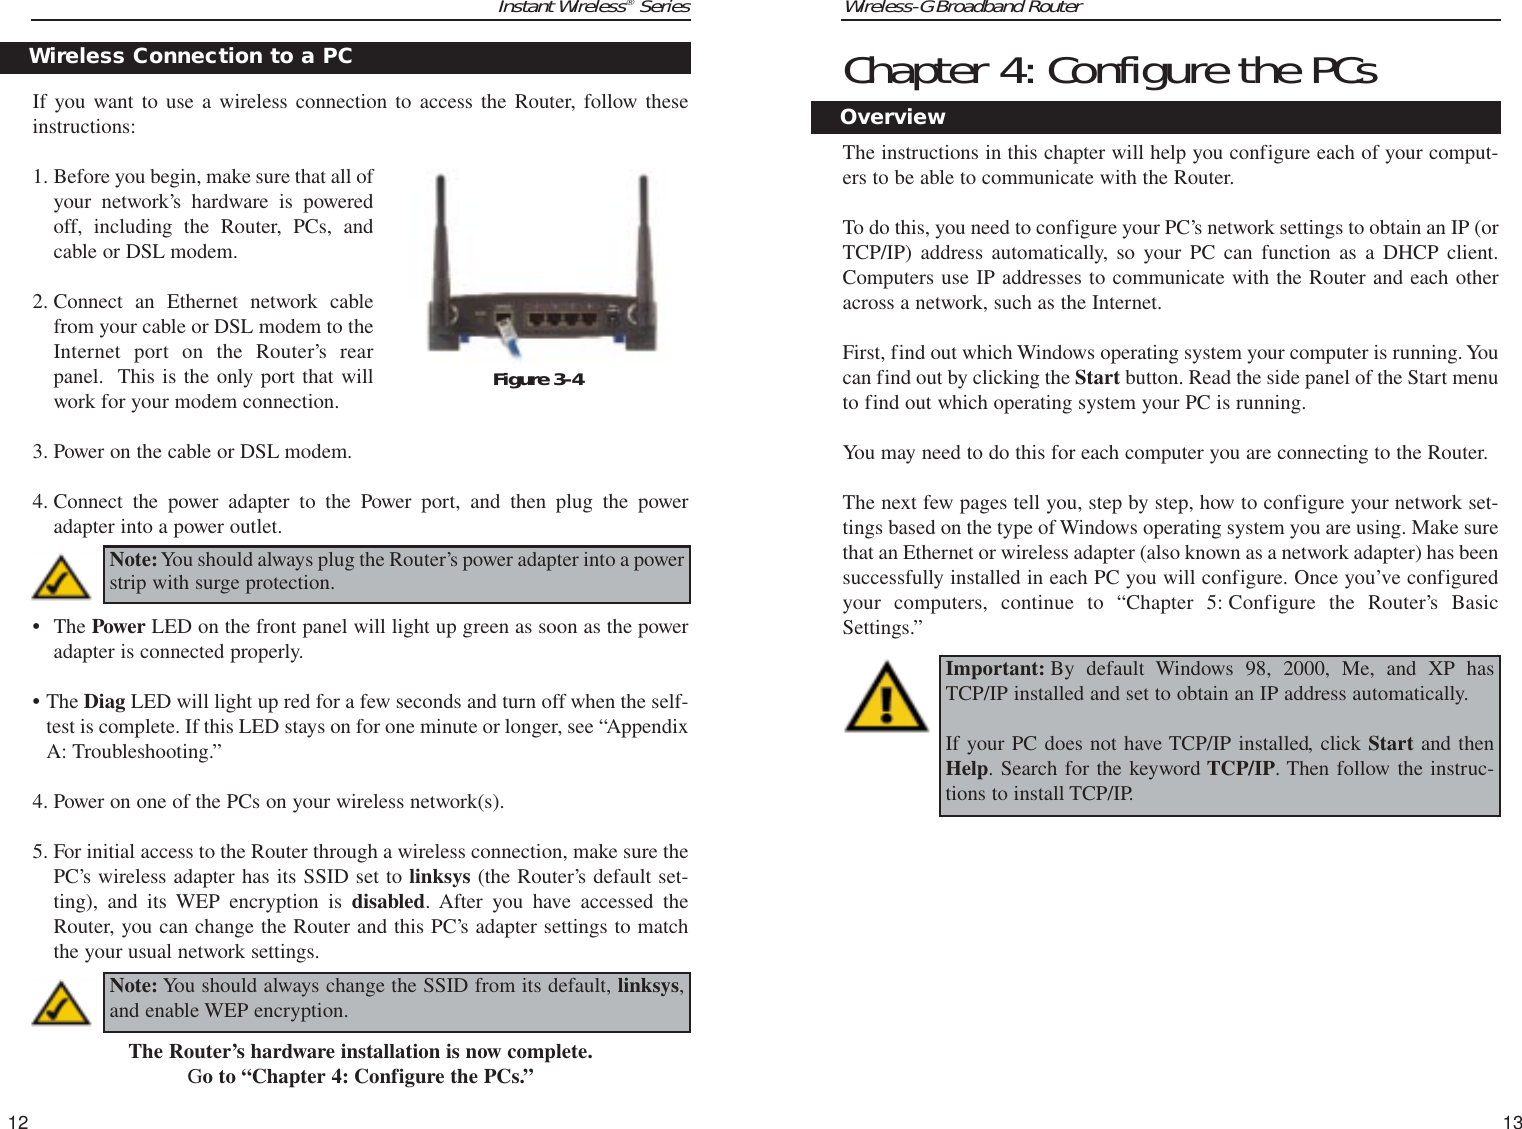 Wireless-G Broadband Router Chapter 4: Configure the PCsThe instructions in this chapter will help you configure each of your comput-ers to be able to communicate with the Router.To do this, you need to configure your PC’s network settings to obtain an IP (orTCP/IP) address automatically, so your PC can function as a DHCP client.Computers use IP addresses to communicate with the Router and each otheracross a network, such as the Internet. First, find out which Windows operating system your computer is running. Youcan find out by clicking the Start button. Read the side panel of the Start menuto find out which operating system your PC is running.You may need to do this for each computer you are connecting to the Router.The next few pages tell you, step by step, how to configure your network set-tings based on the type of Windows operating system you are using. Make surethat an Ethernet or wireless adapter (also known as a network adapter) has beensuccessfully installed in each PC you will configure. Once you’ve configuredyour computers, continue to “Chapter 5: Configure the Router’s BasicSettings.” 13Instant Wireless®Series12Important: By default Windows 98, 2000, Me, and XP hasTCP/IP installed and set to obtain an IP address automatically. If your PC does not have TCP/IP installed, click Start and thenHelp. Search for the keyword TCP/IP. Then follow the instruc-tions to install TCP/IP.OverviewIf you want to use a wireless connection to access the Router, follow theseinstructions:1. Before you begin, make sure that all ofyour network’s hardware is poweredoff, including the Router, PCs, andcable or DSL modem.2. Connect an Ethernet network cablefrom your cable or DSL modem to theInternet port on the Router’s rearpanel.  This is the only port that willwork for your modem connection. 3. Power on the cable or DSL modem. 4. Connect the power adapter to the Power port, and then plug the poweradapter into a power outlet.  •The Power LED on the front panel will light up green as soon as the poweradapter is connected properly.•The Diag LED will light up red for a few seconds and turn off when the self-test is complete. If this LED stays on for one minute or longer, see “AppendixA: Troubleshooting.”4. Power on one of the PCs on your wireless network(s).5. For initial access to the Router through a wireless connection, make sure thePC’s wireless adapter has its SSID set to linksys (the Router’s default set-ting), and its WEP encryption is disabled. After you have accessed theRouter, you can change the Router and this PC’s adapter settings to matchthe your usual network settings.The Router’s hardware installation is now complete.Go to “Chapter 4: Configure the PCs.”Wireless Connection to a PCNote:You should always plug the Router’s power adapter into a powerstrip with surge protection.Figure 3-4Note: You should always change the SSID from its default, linksys,and enable WEP encryption.